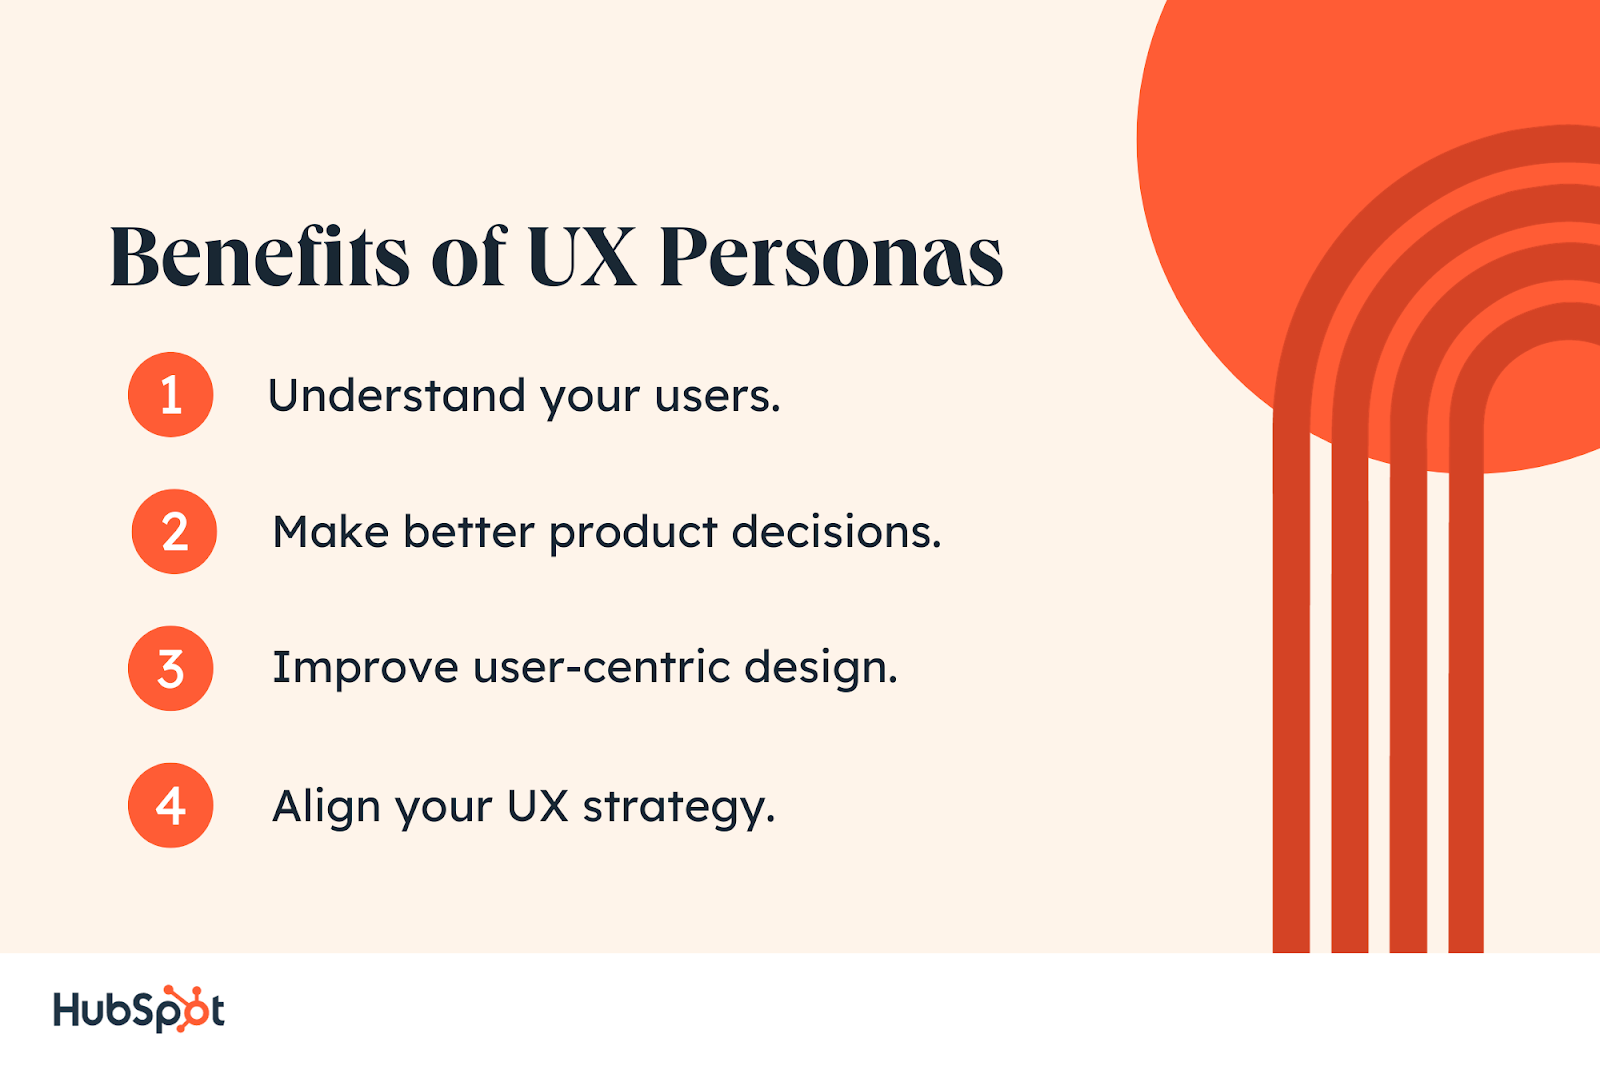 Benefits of UX Personas. Understand your users. Make better product decisions. Improve user-centric design. Align your UX strategy.